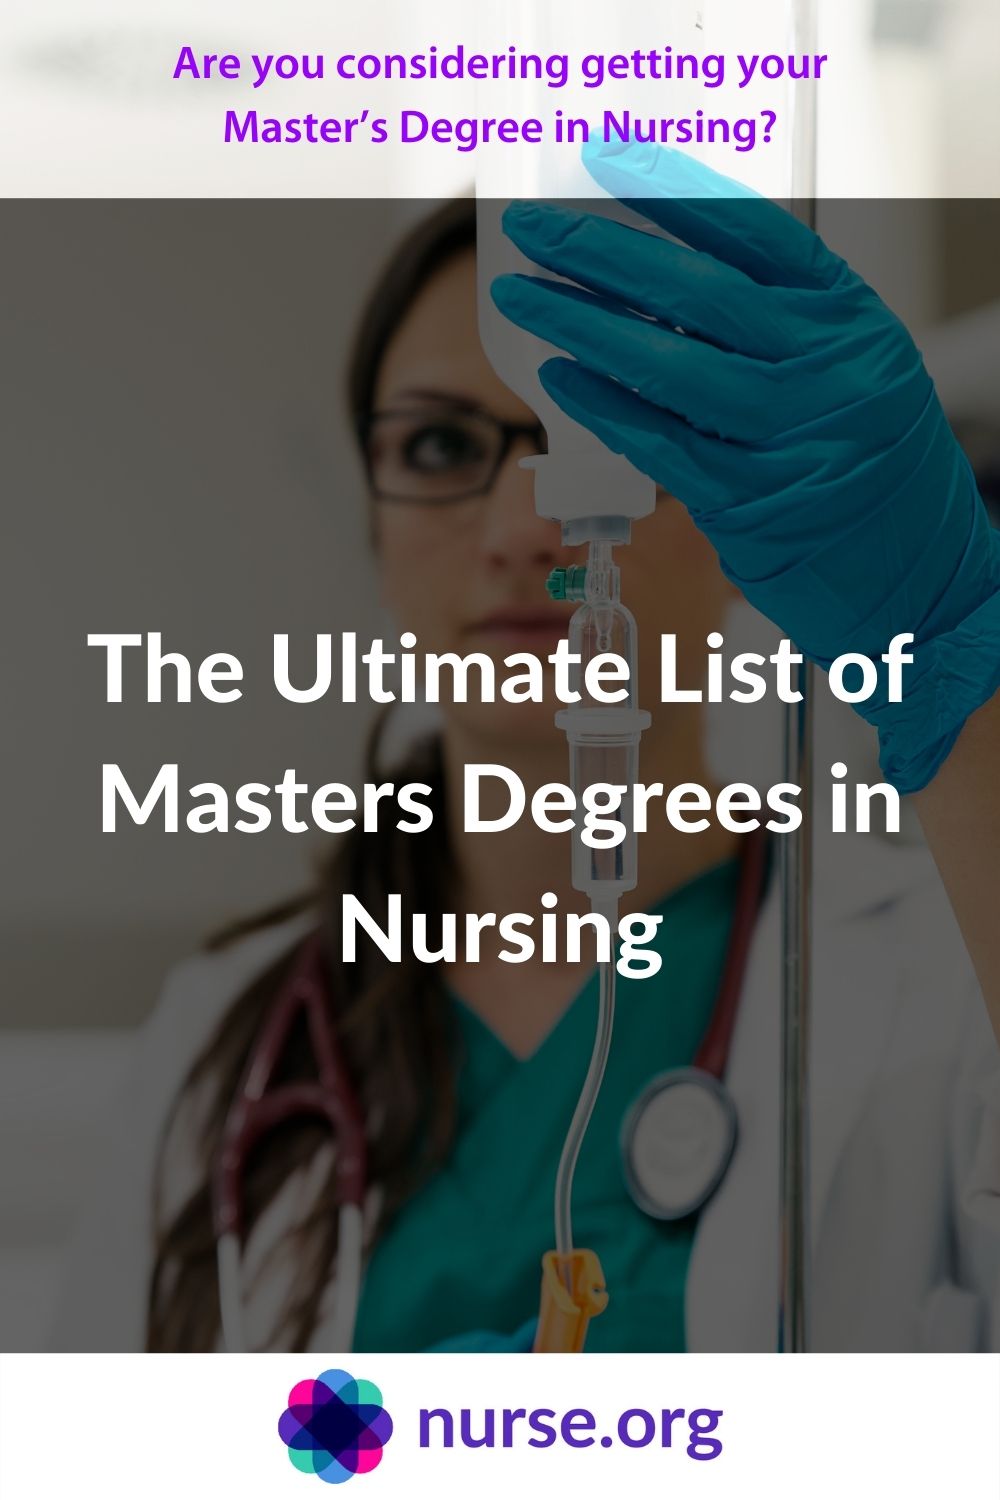 The Ultimate List of Master's Degrees in Nursing